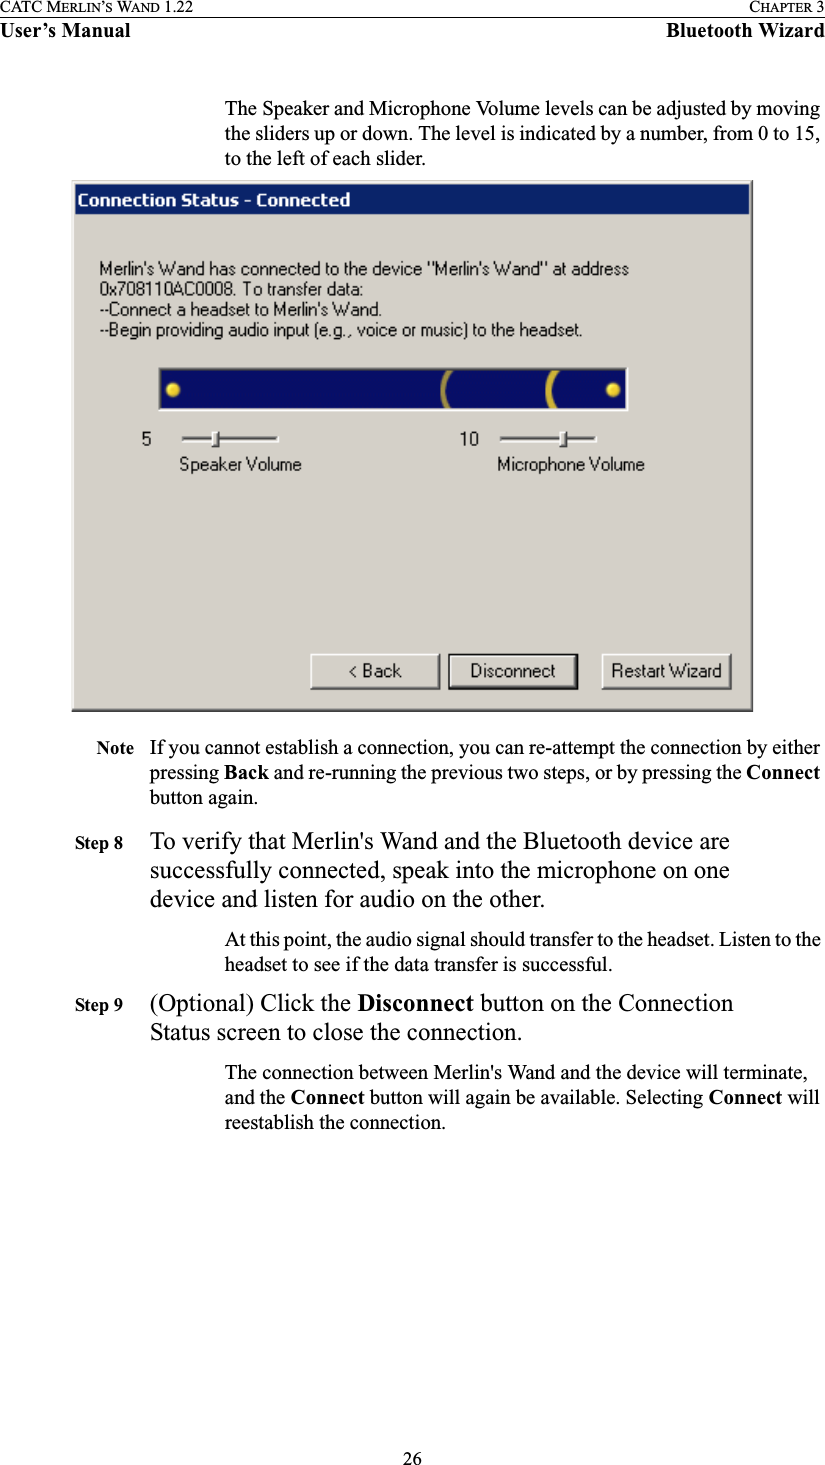 26CATC MERLIN’S WAND 1.22 CHAPTER 3User’s Manual Bluetooth WizardThe Speaker and Microphone Volume levels can be adjusted by moving the sliders up or down. The level is indicated by a number, from 0 to 15, to the left of each slider. Note If you cannot establish a connection, you can re-attempt the connection by either pressing Back and re-running the previous two steps, or by pressing the Connect button again.Step 8 To verify that Merlin&apos;s Wand and the Bluetooth device are successfully connected, speak into the microphone on one device and listen for audio on the other.At this point, the audio signal should transfer to the headset. Listen to the headset to see if the data transfer is successful. Step 9 (Optional) Click the Disconnect button on the Connection Status screen to close the connection.The connection between Merlin&apos;s Wand and the device will terminate, and the Connect button will again be available. Selecting Connect will reestablish the connection.